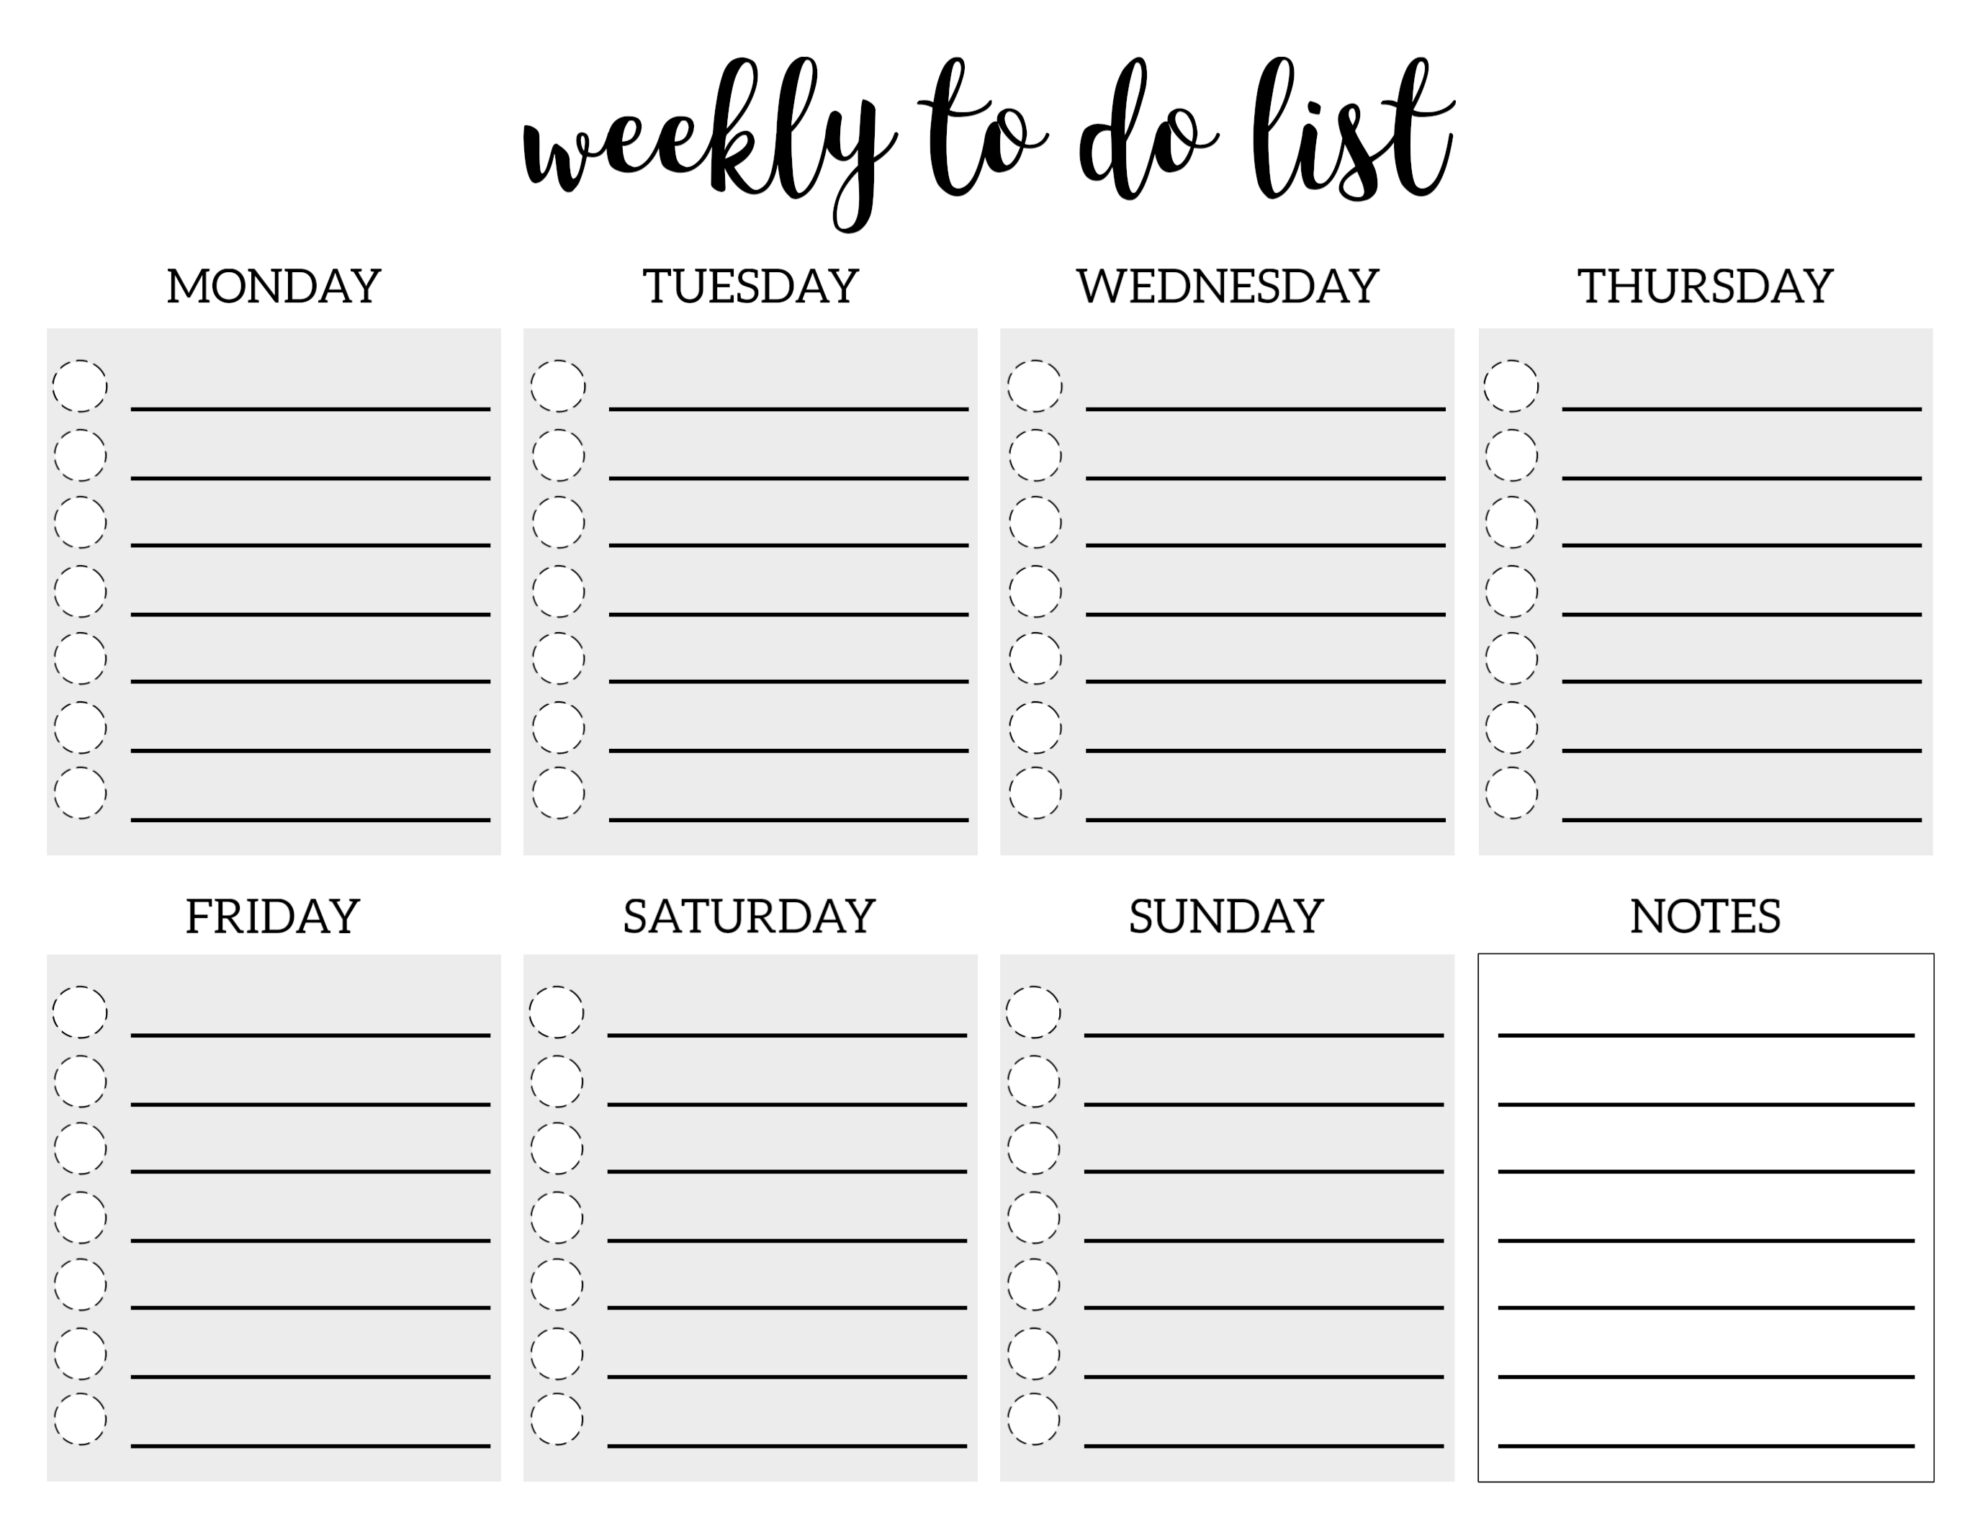 Weekly To Do List Printable Checklist Template - Paper Trail Design Regarding Blank To Do List Template